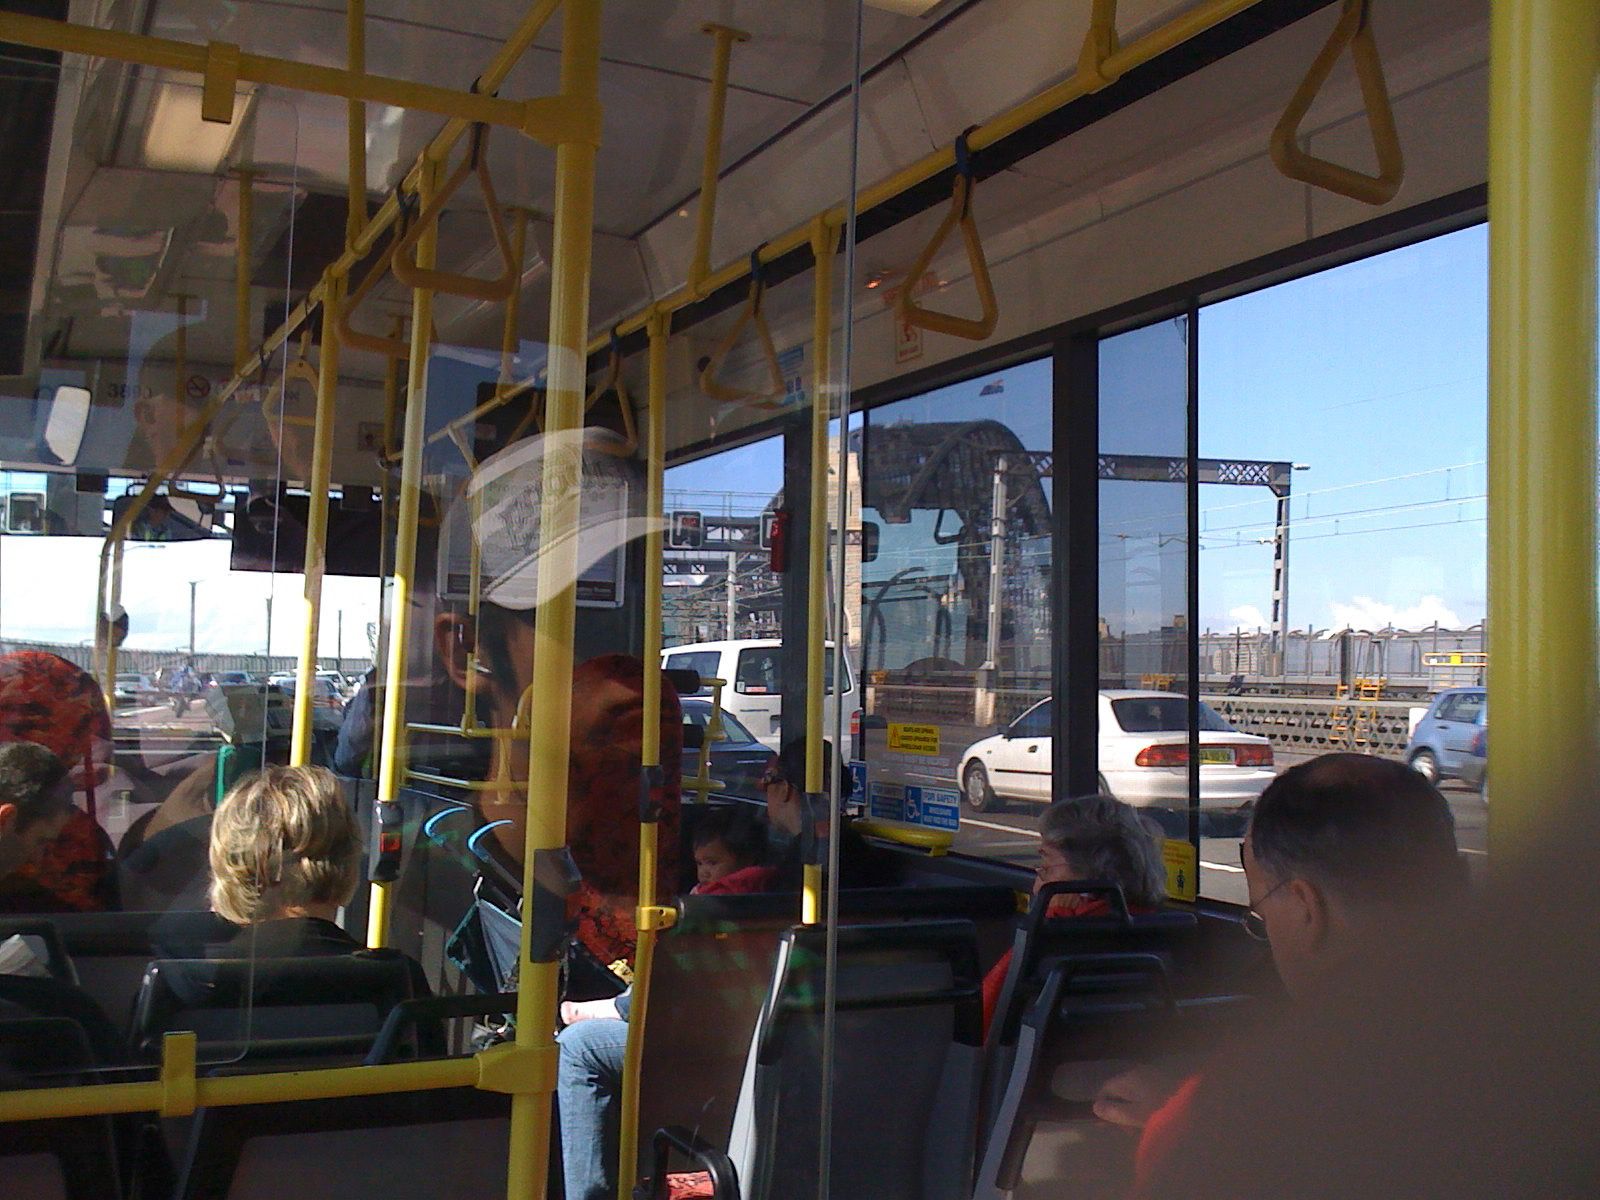 A photo taken from inside a bus looking out the opposite side where the arch of the Sydney Harbour Bridge is just visible.